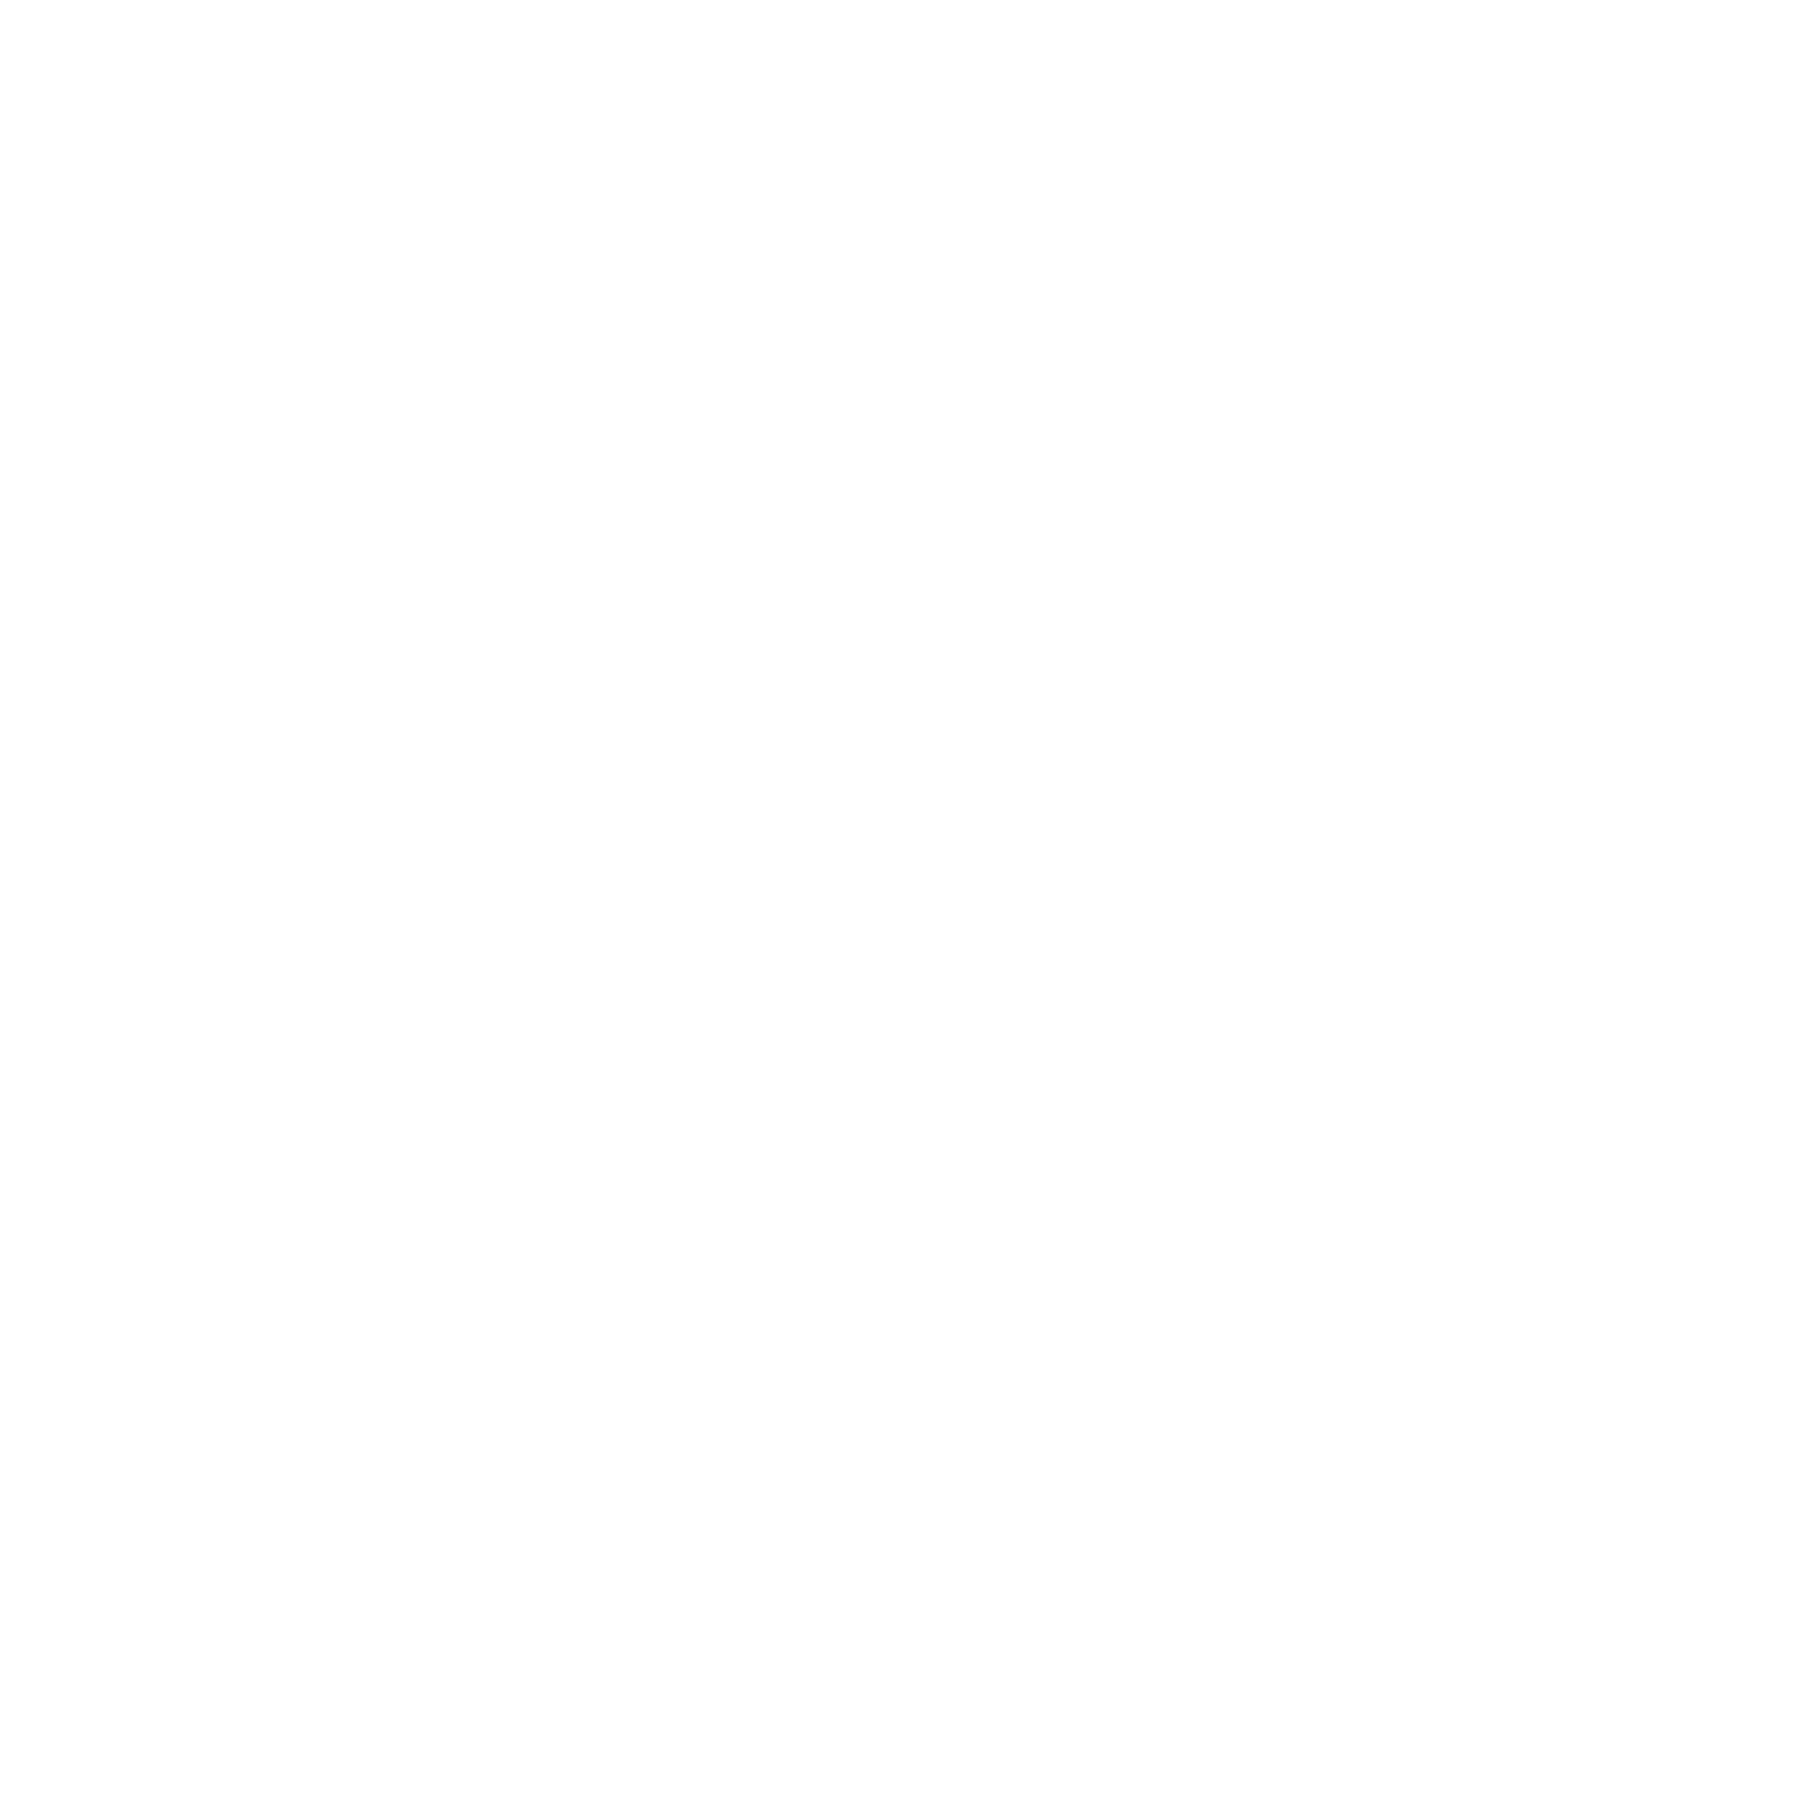 A white outline of a plate, fork and knife used as a symbol for restaurants that are members of the Paducah Hospitality Association.